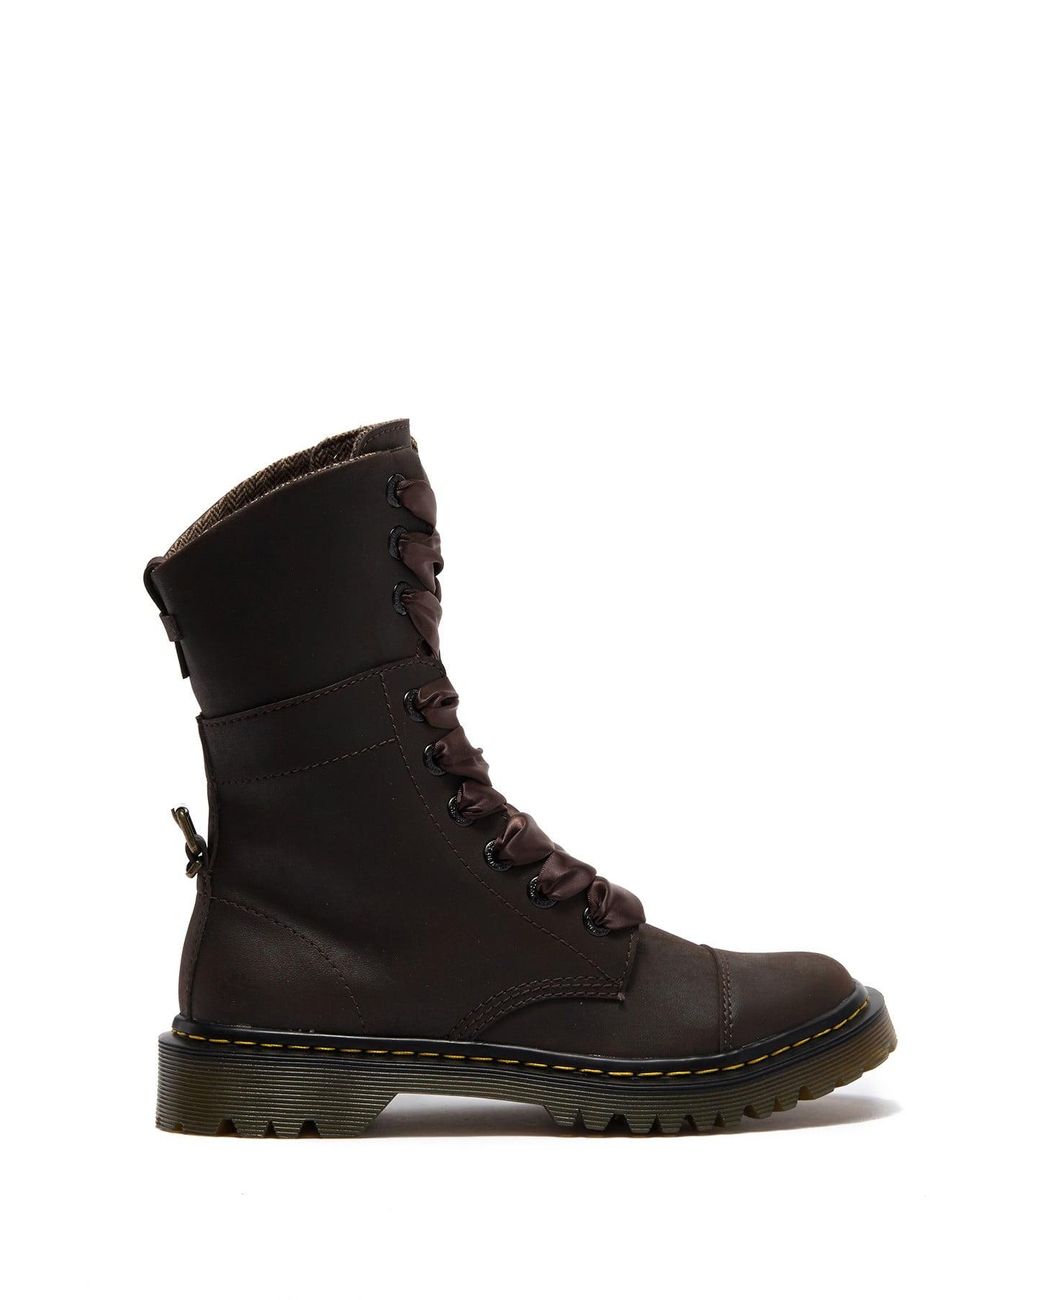 Dr. Martens Leather Faora Ribbon Lace-up Boot in Dark Brown (Brown) | Lyst